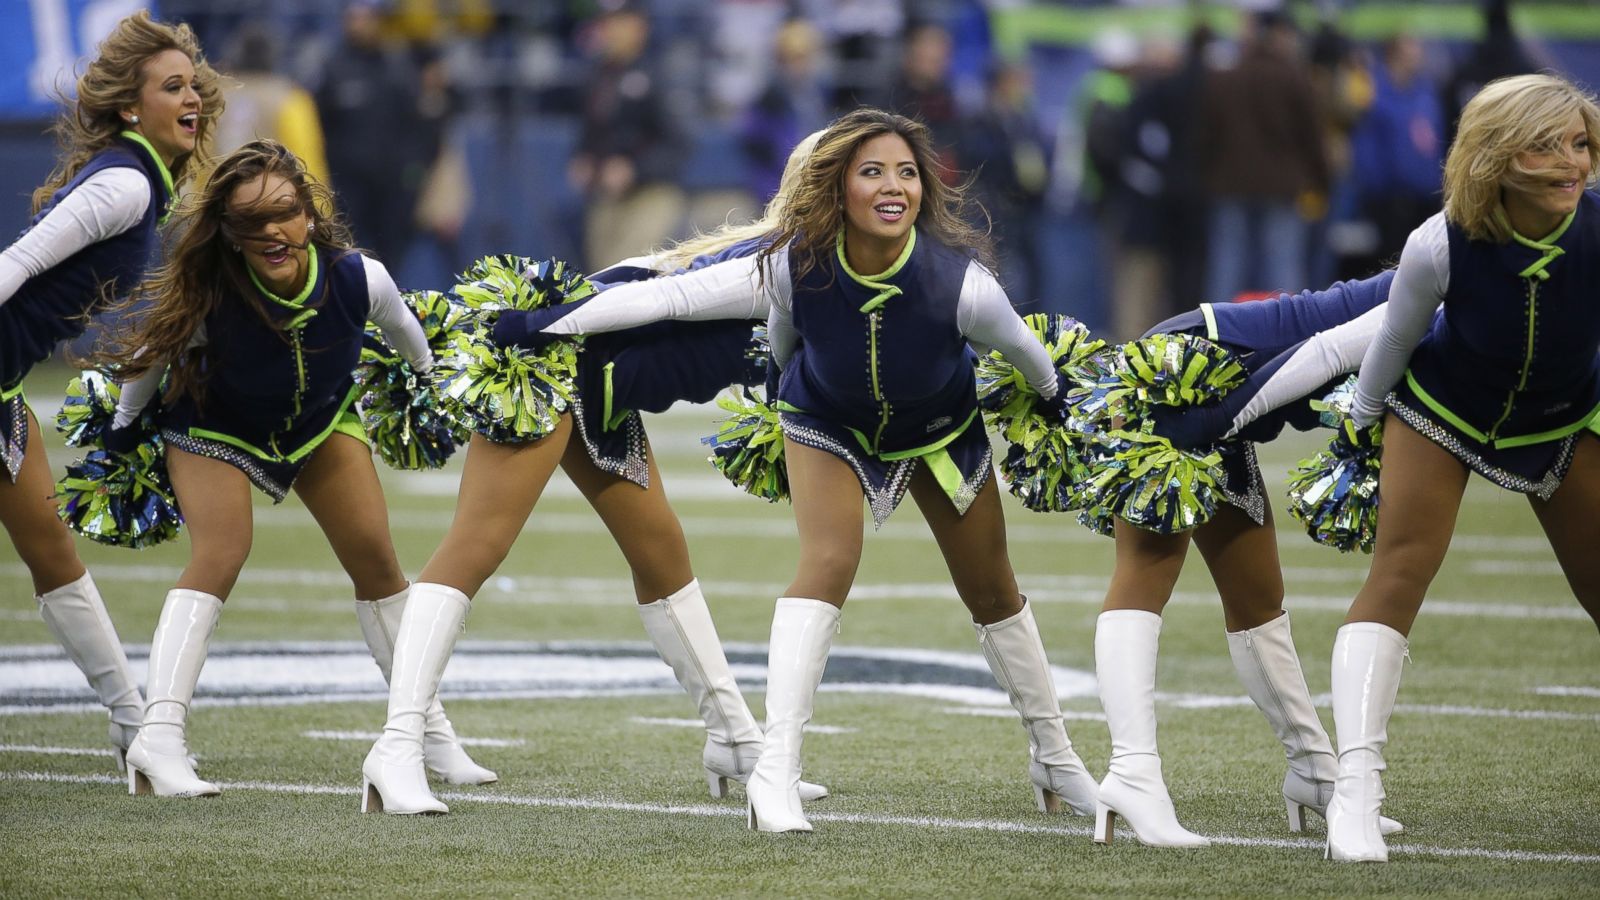 The Rules For Being An NFL Cheerleader May Surprise You ABC News